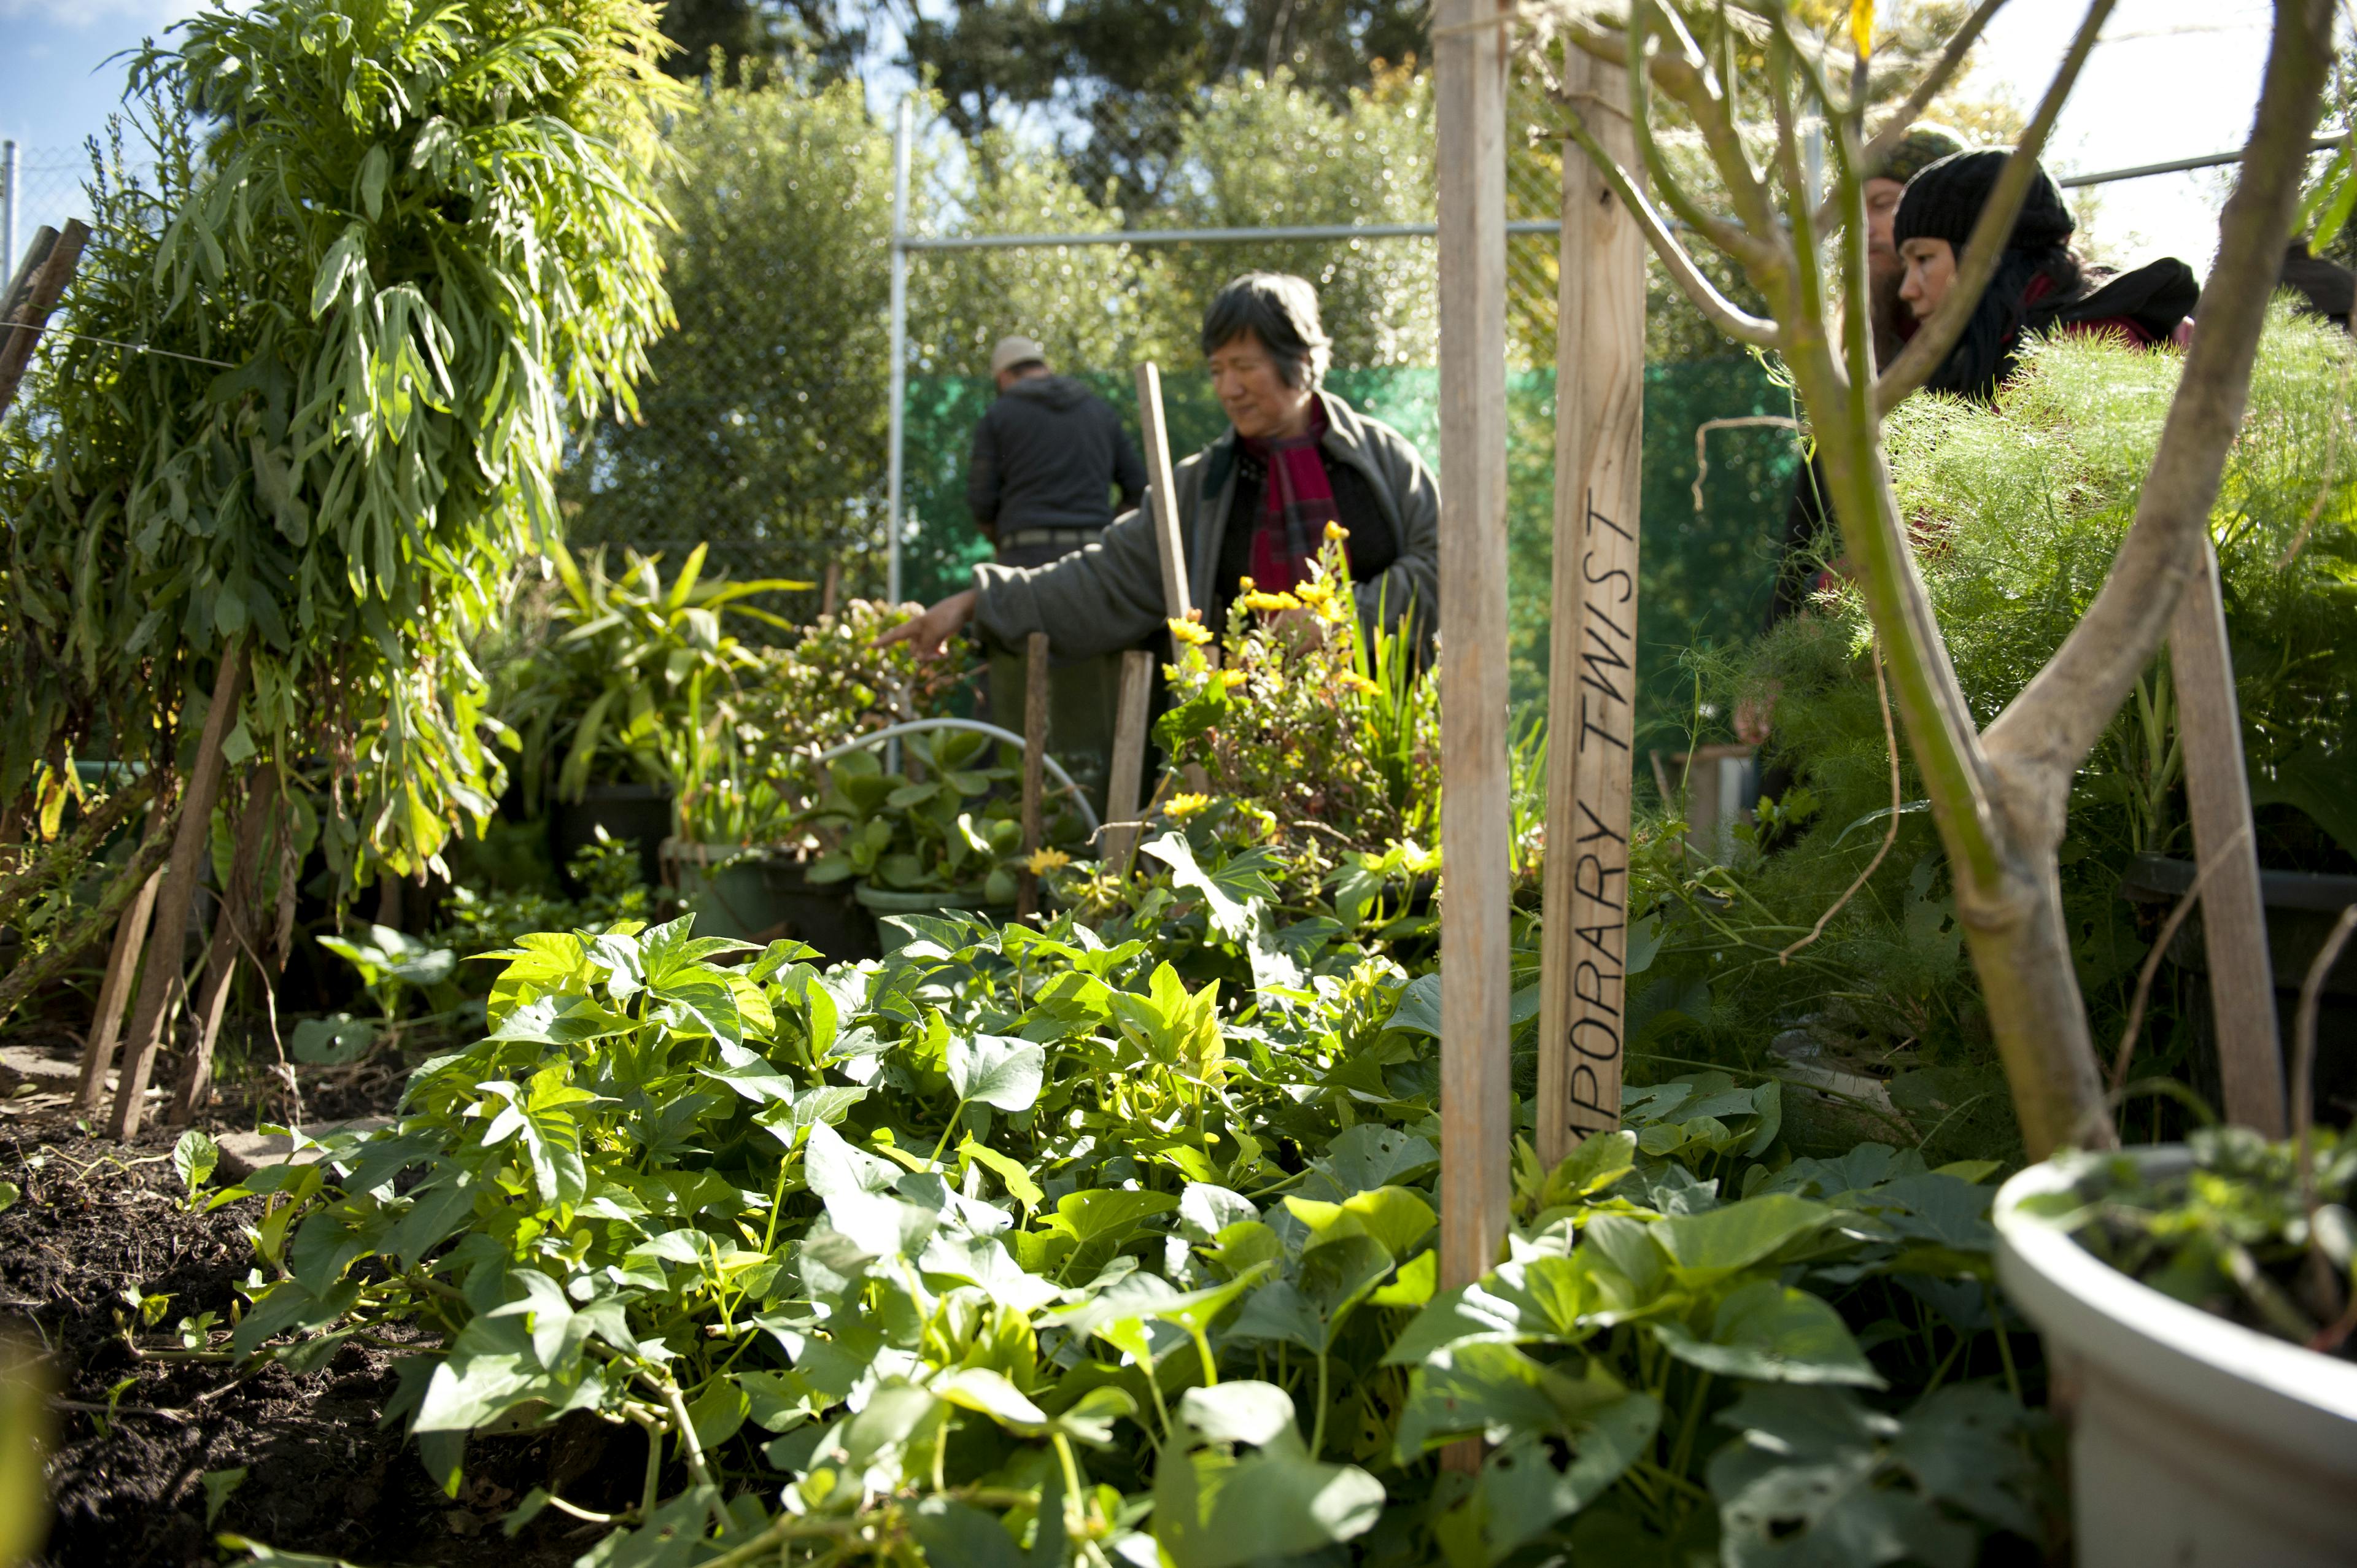 People work in the lush garden of Cultivating Community